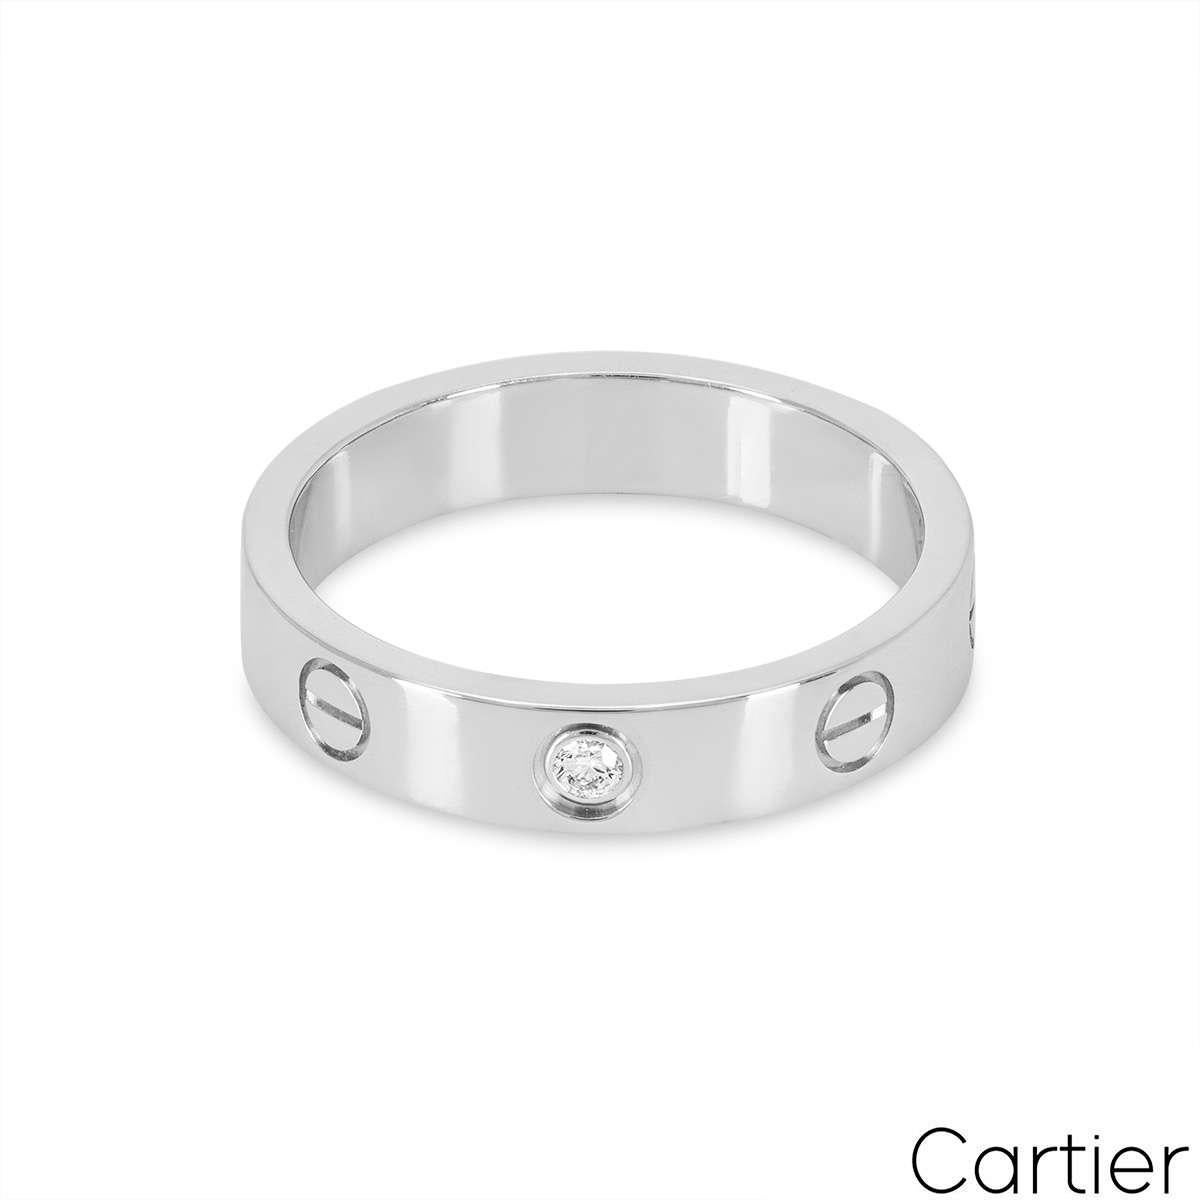 Cartier White Gold Diamond Love Wedding Band Size 50 B4050500 In Excellent Condition For Sale In London, GB